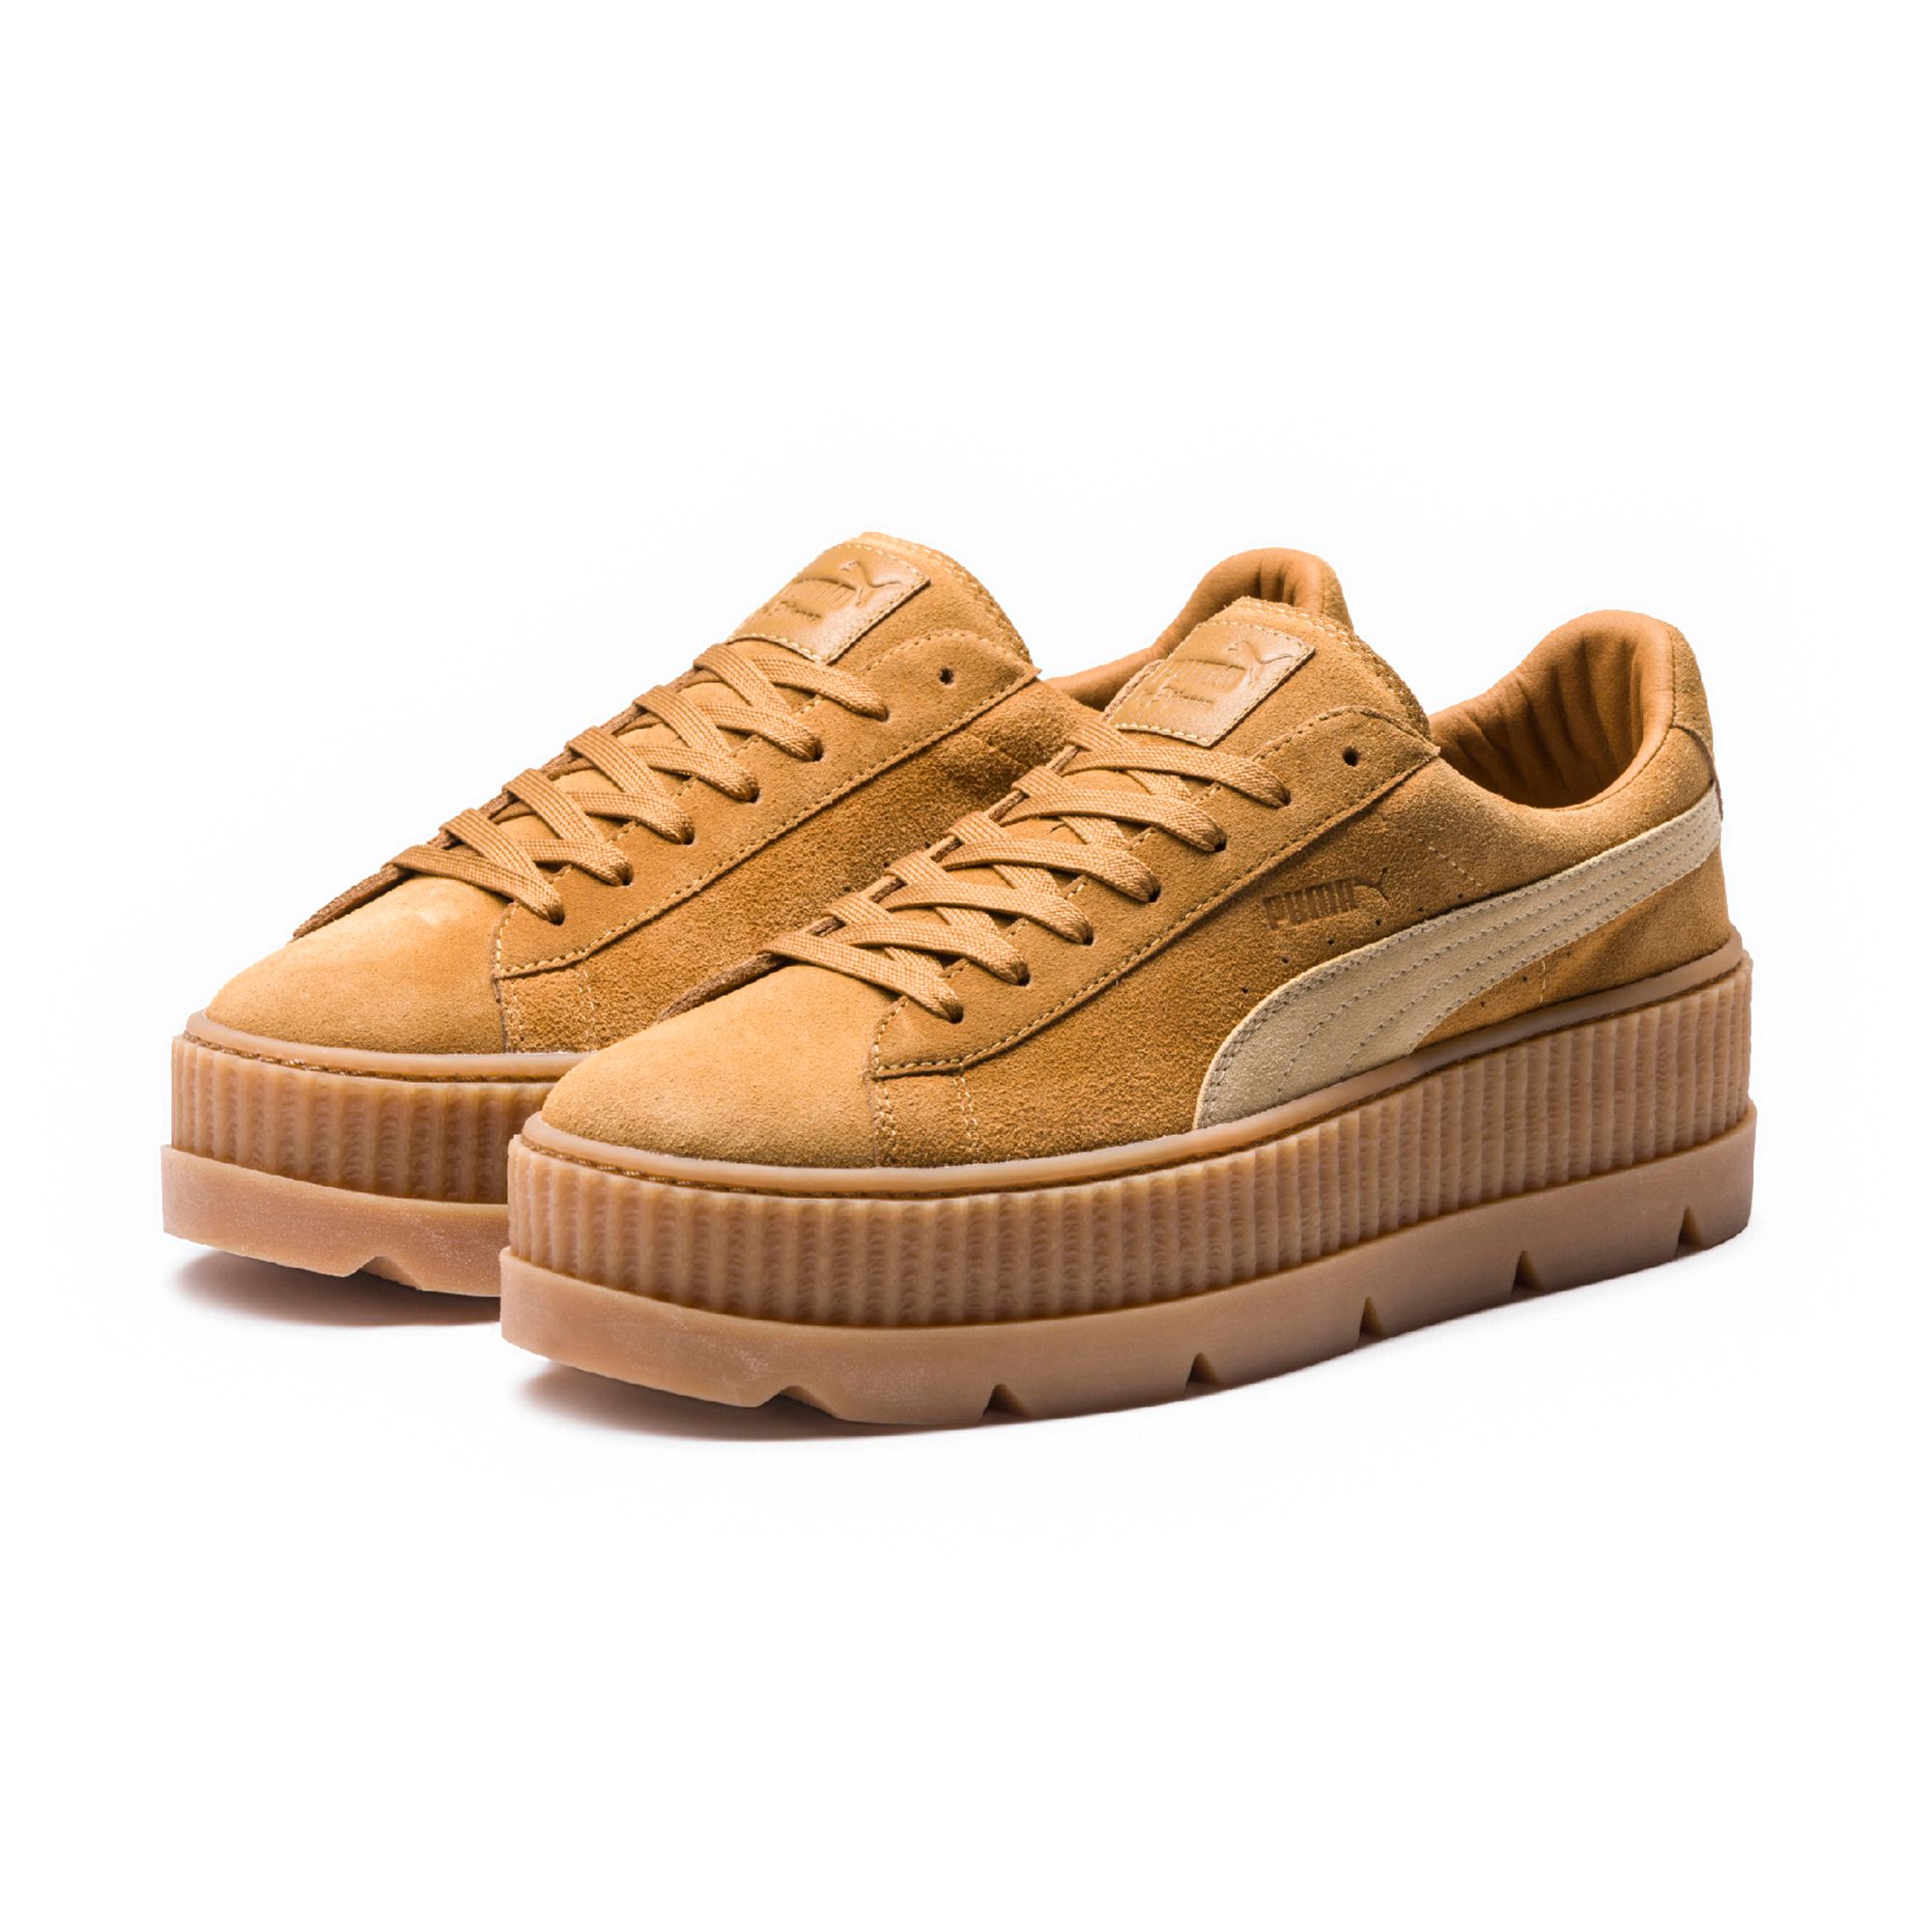 ФЕНТИ дамы Suede Cleated Creeper